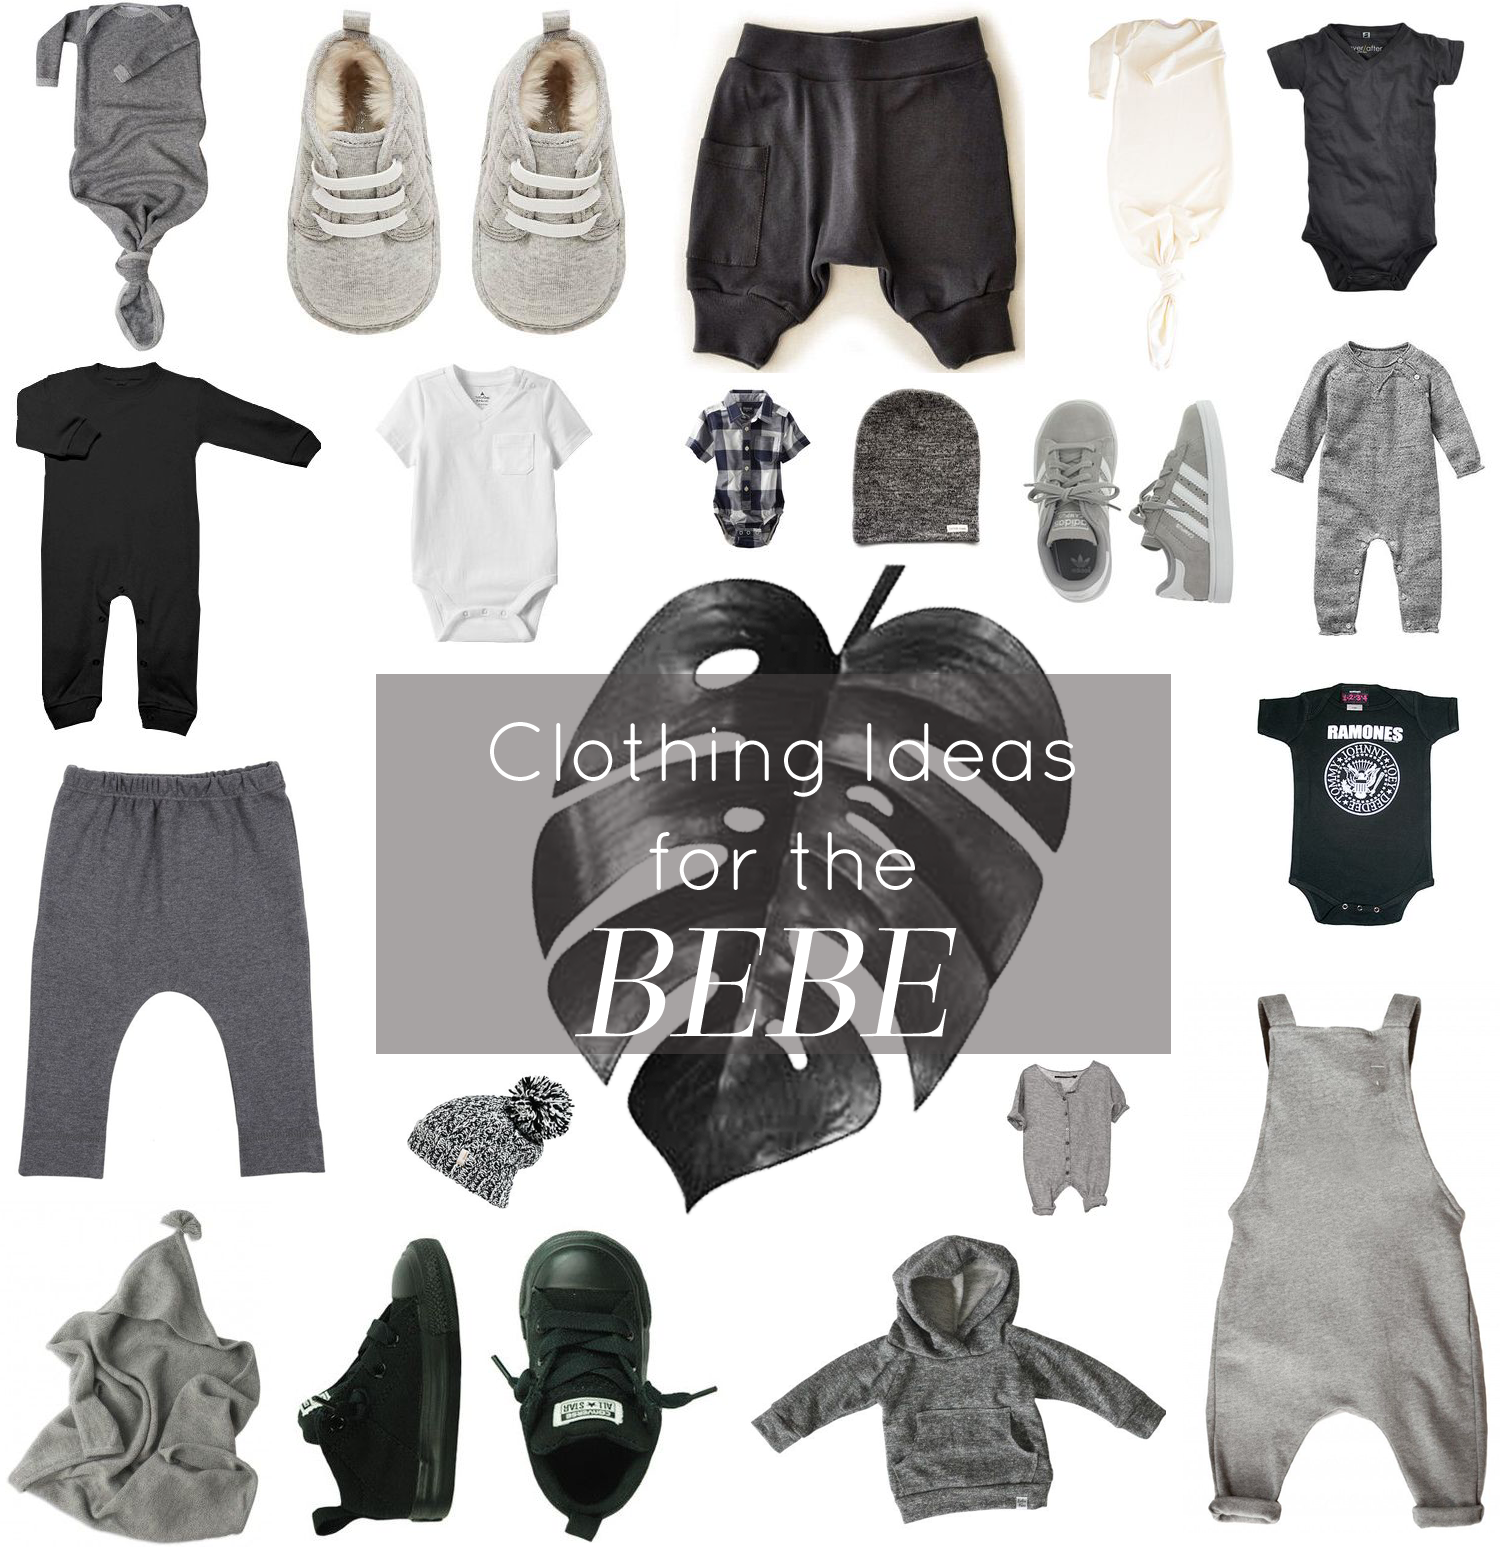 Clothes Inspiration for the Bebe